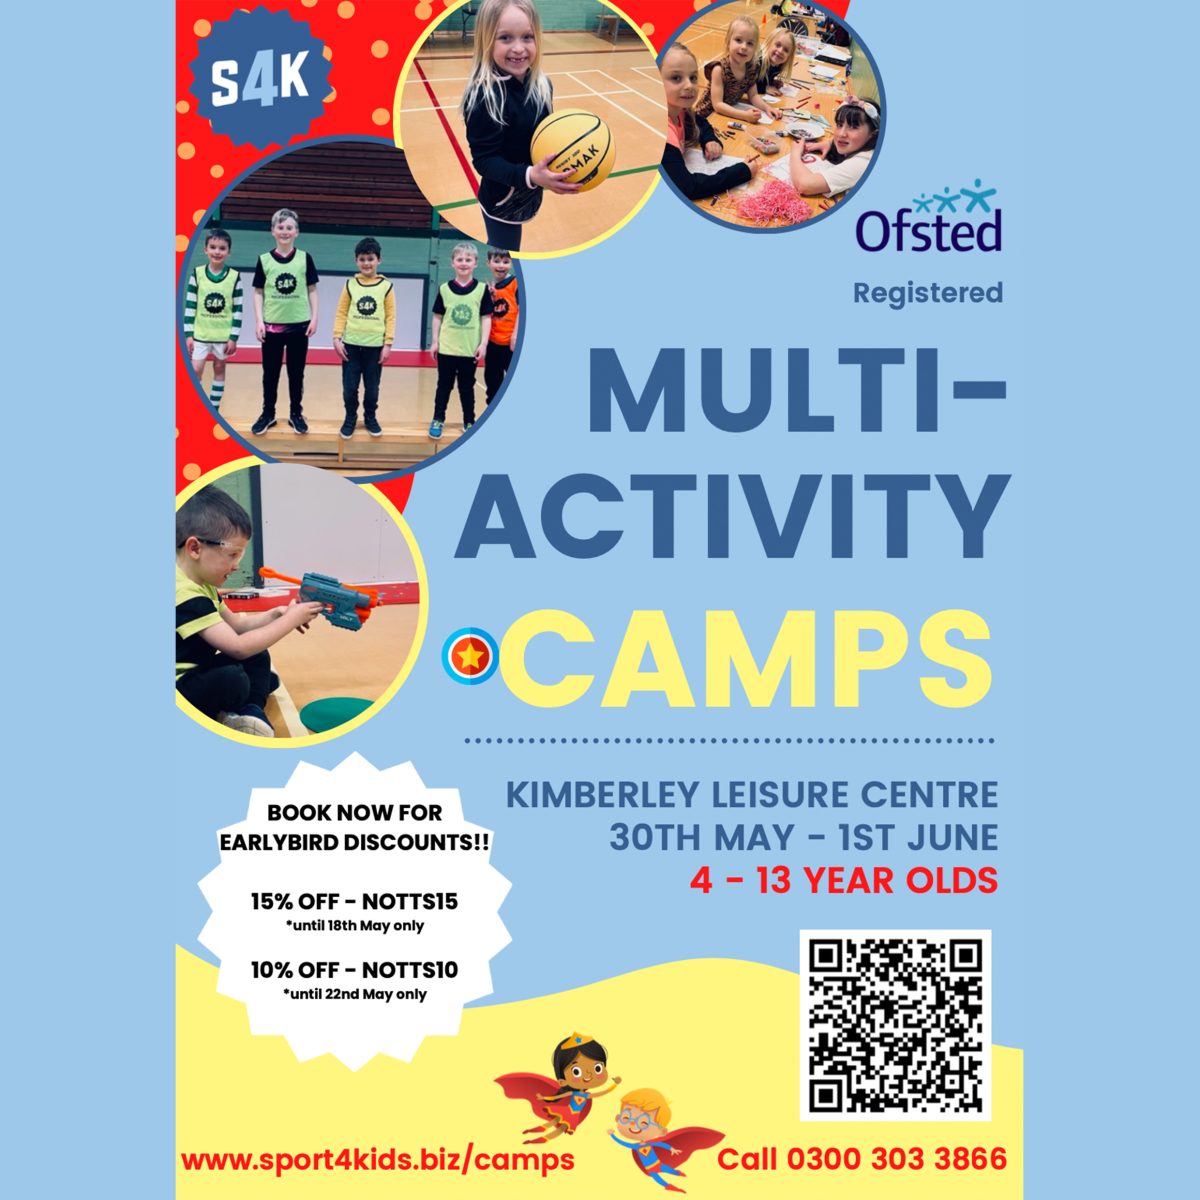 Multi-Activity Camps For Kids